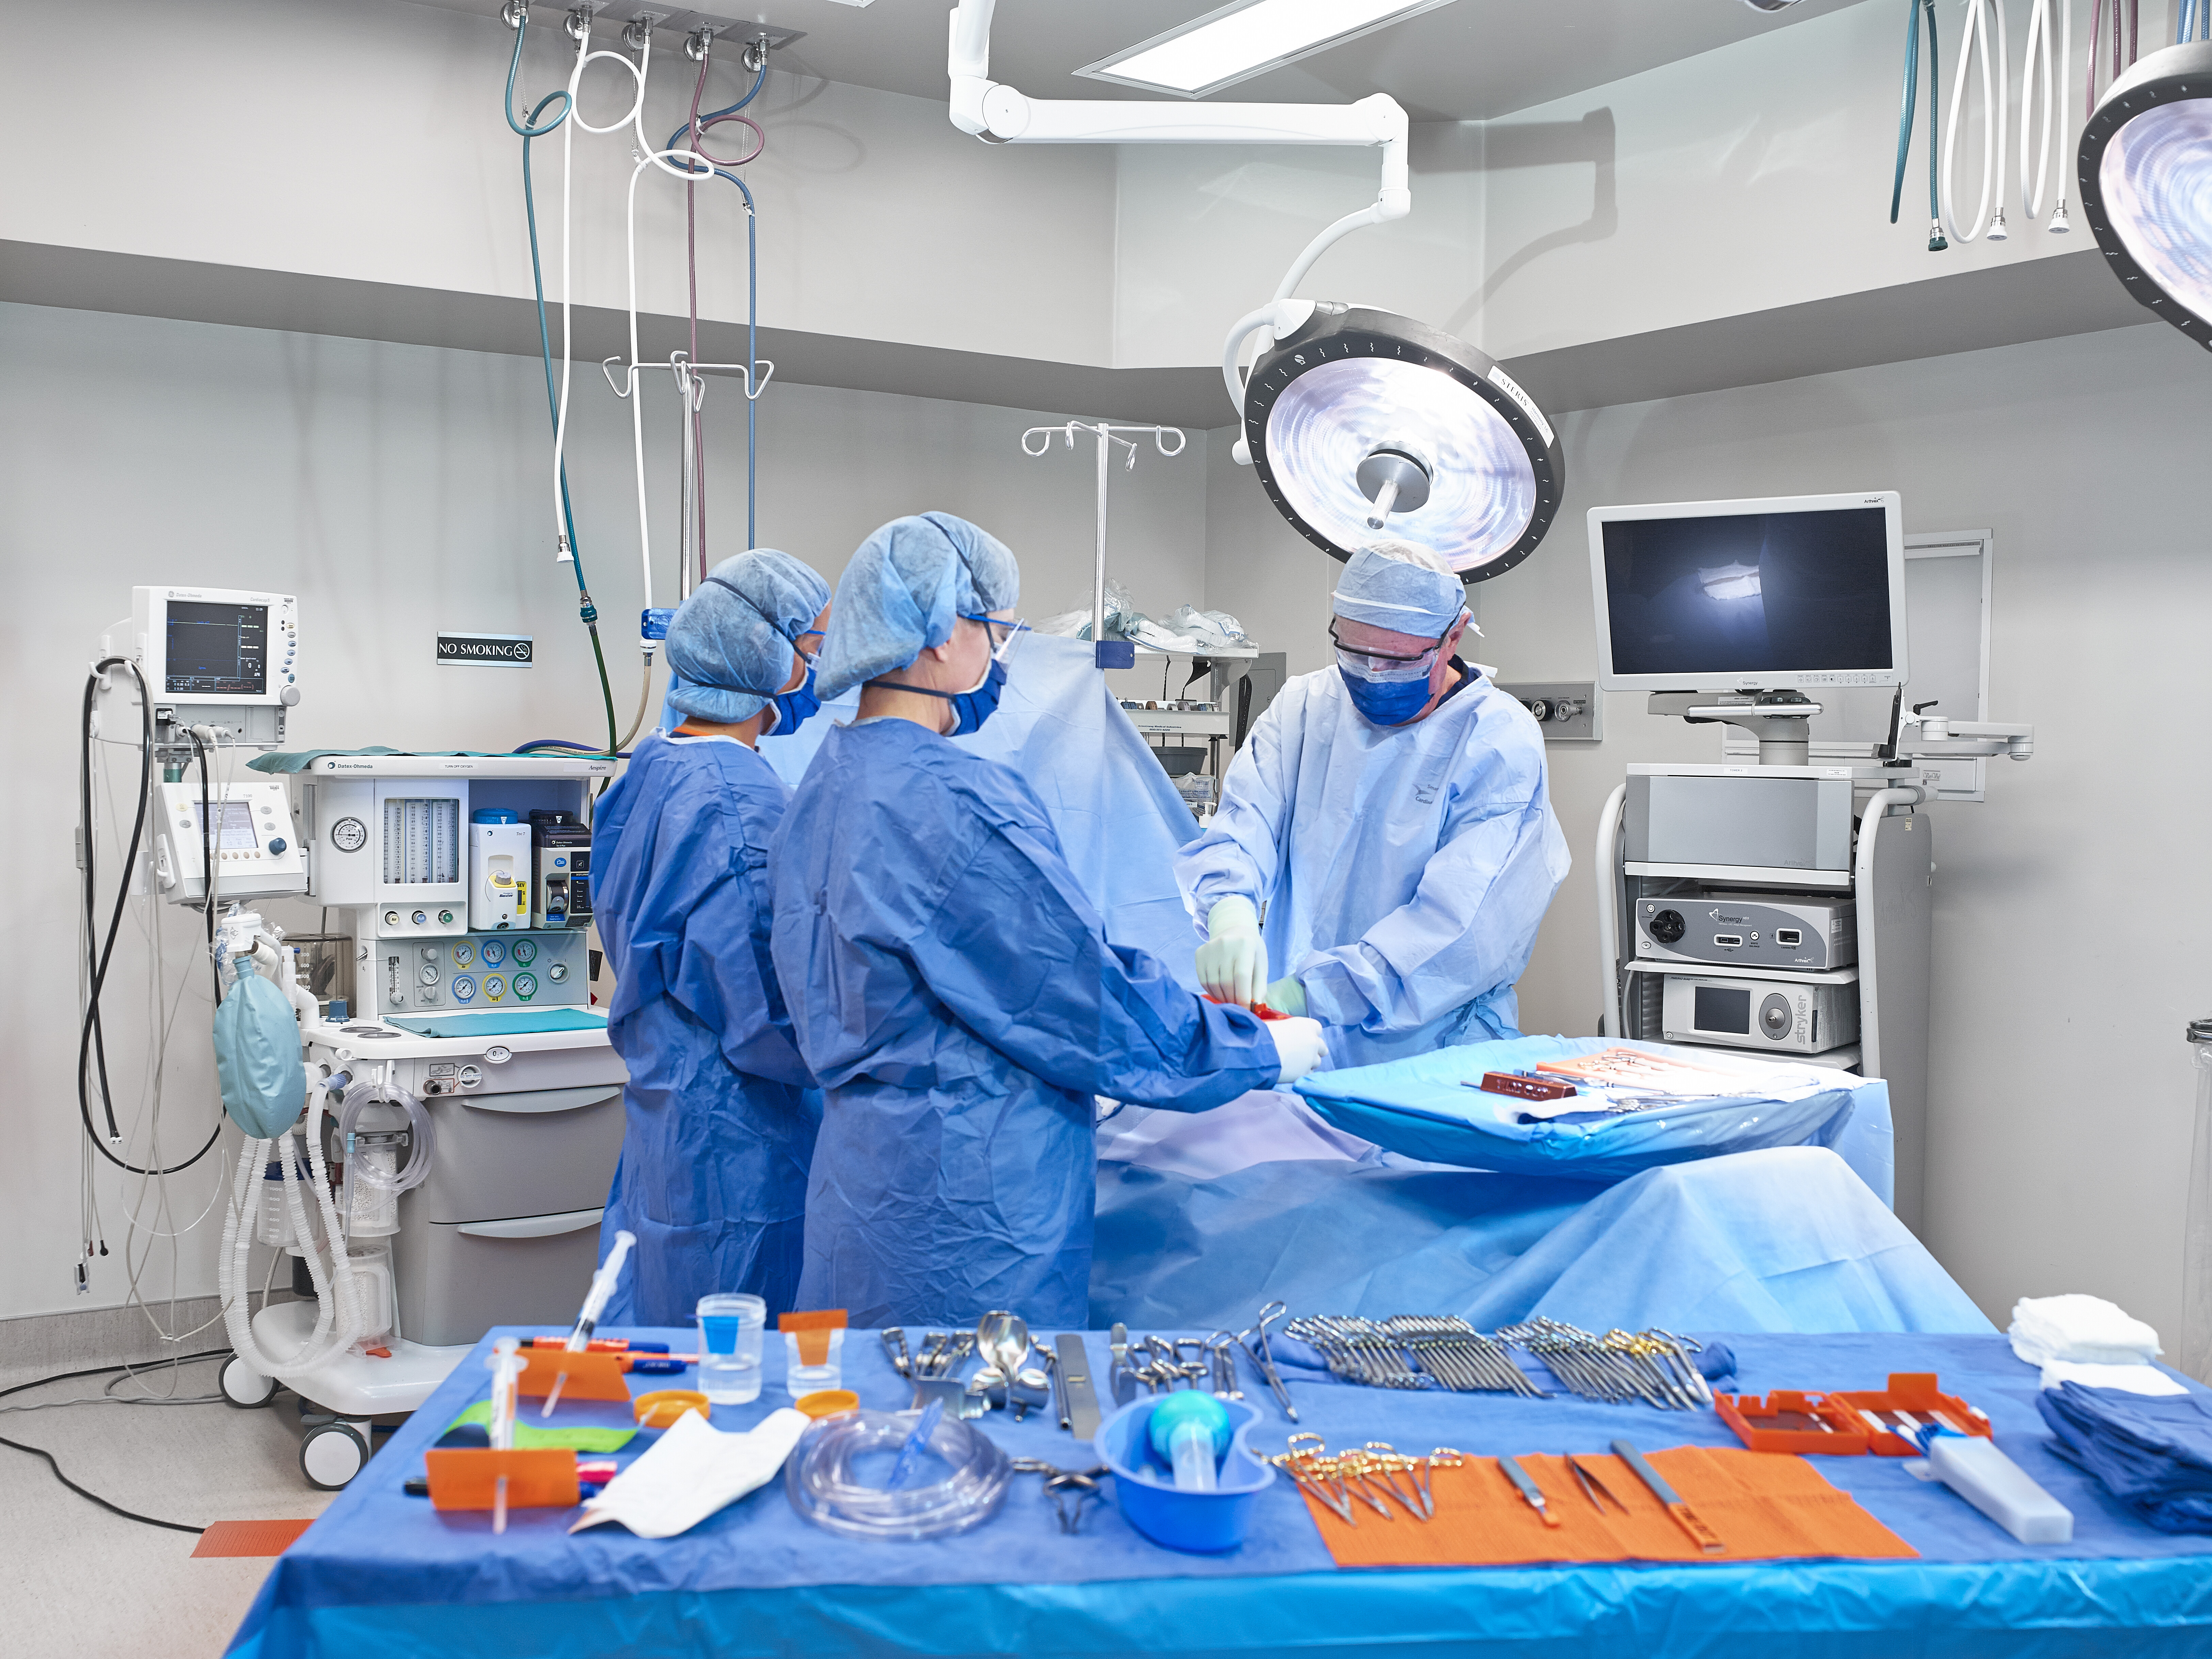 SANDEL Hospital _ Surgical Application - Products in Operating Room.jpg